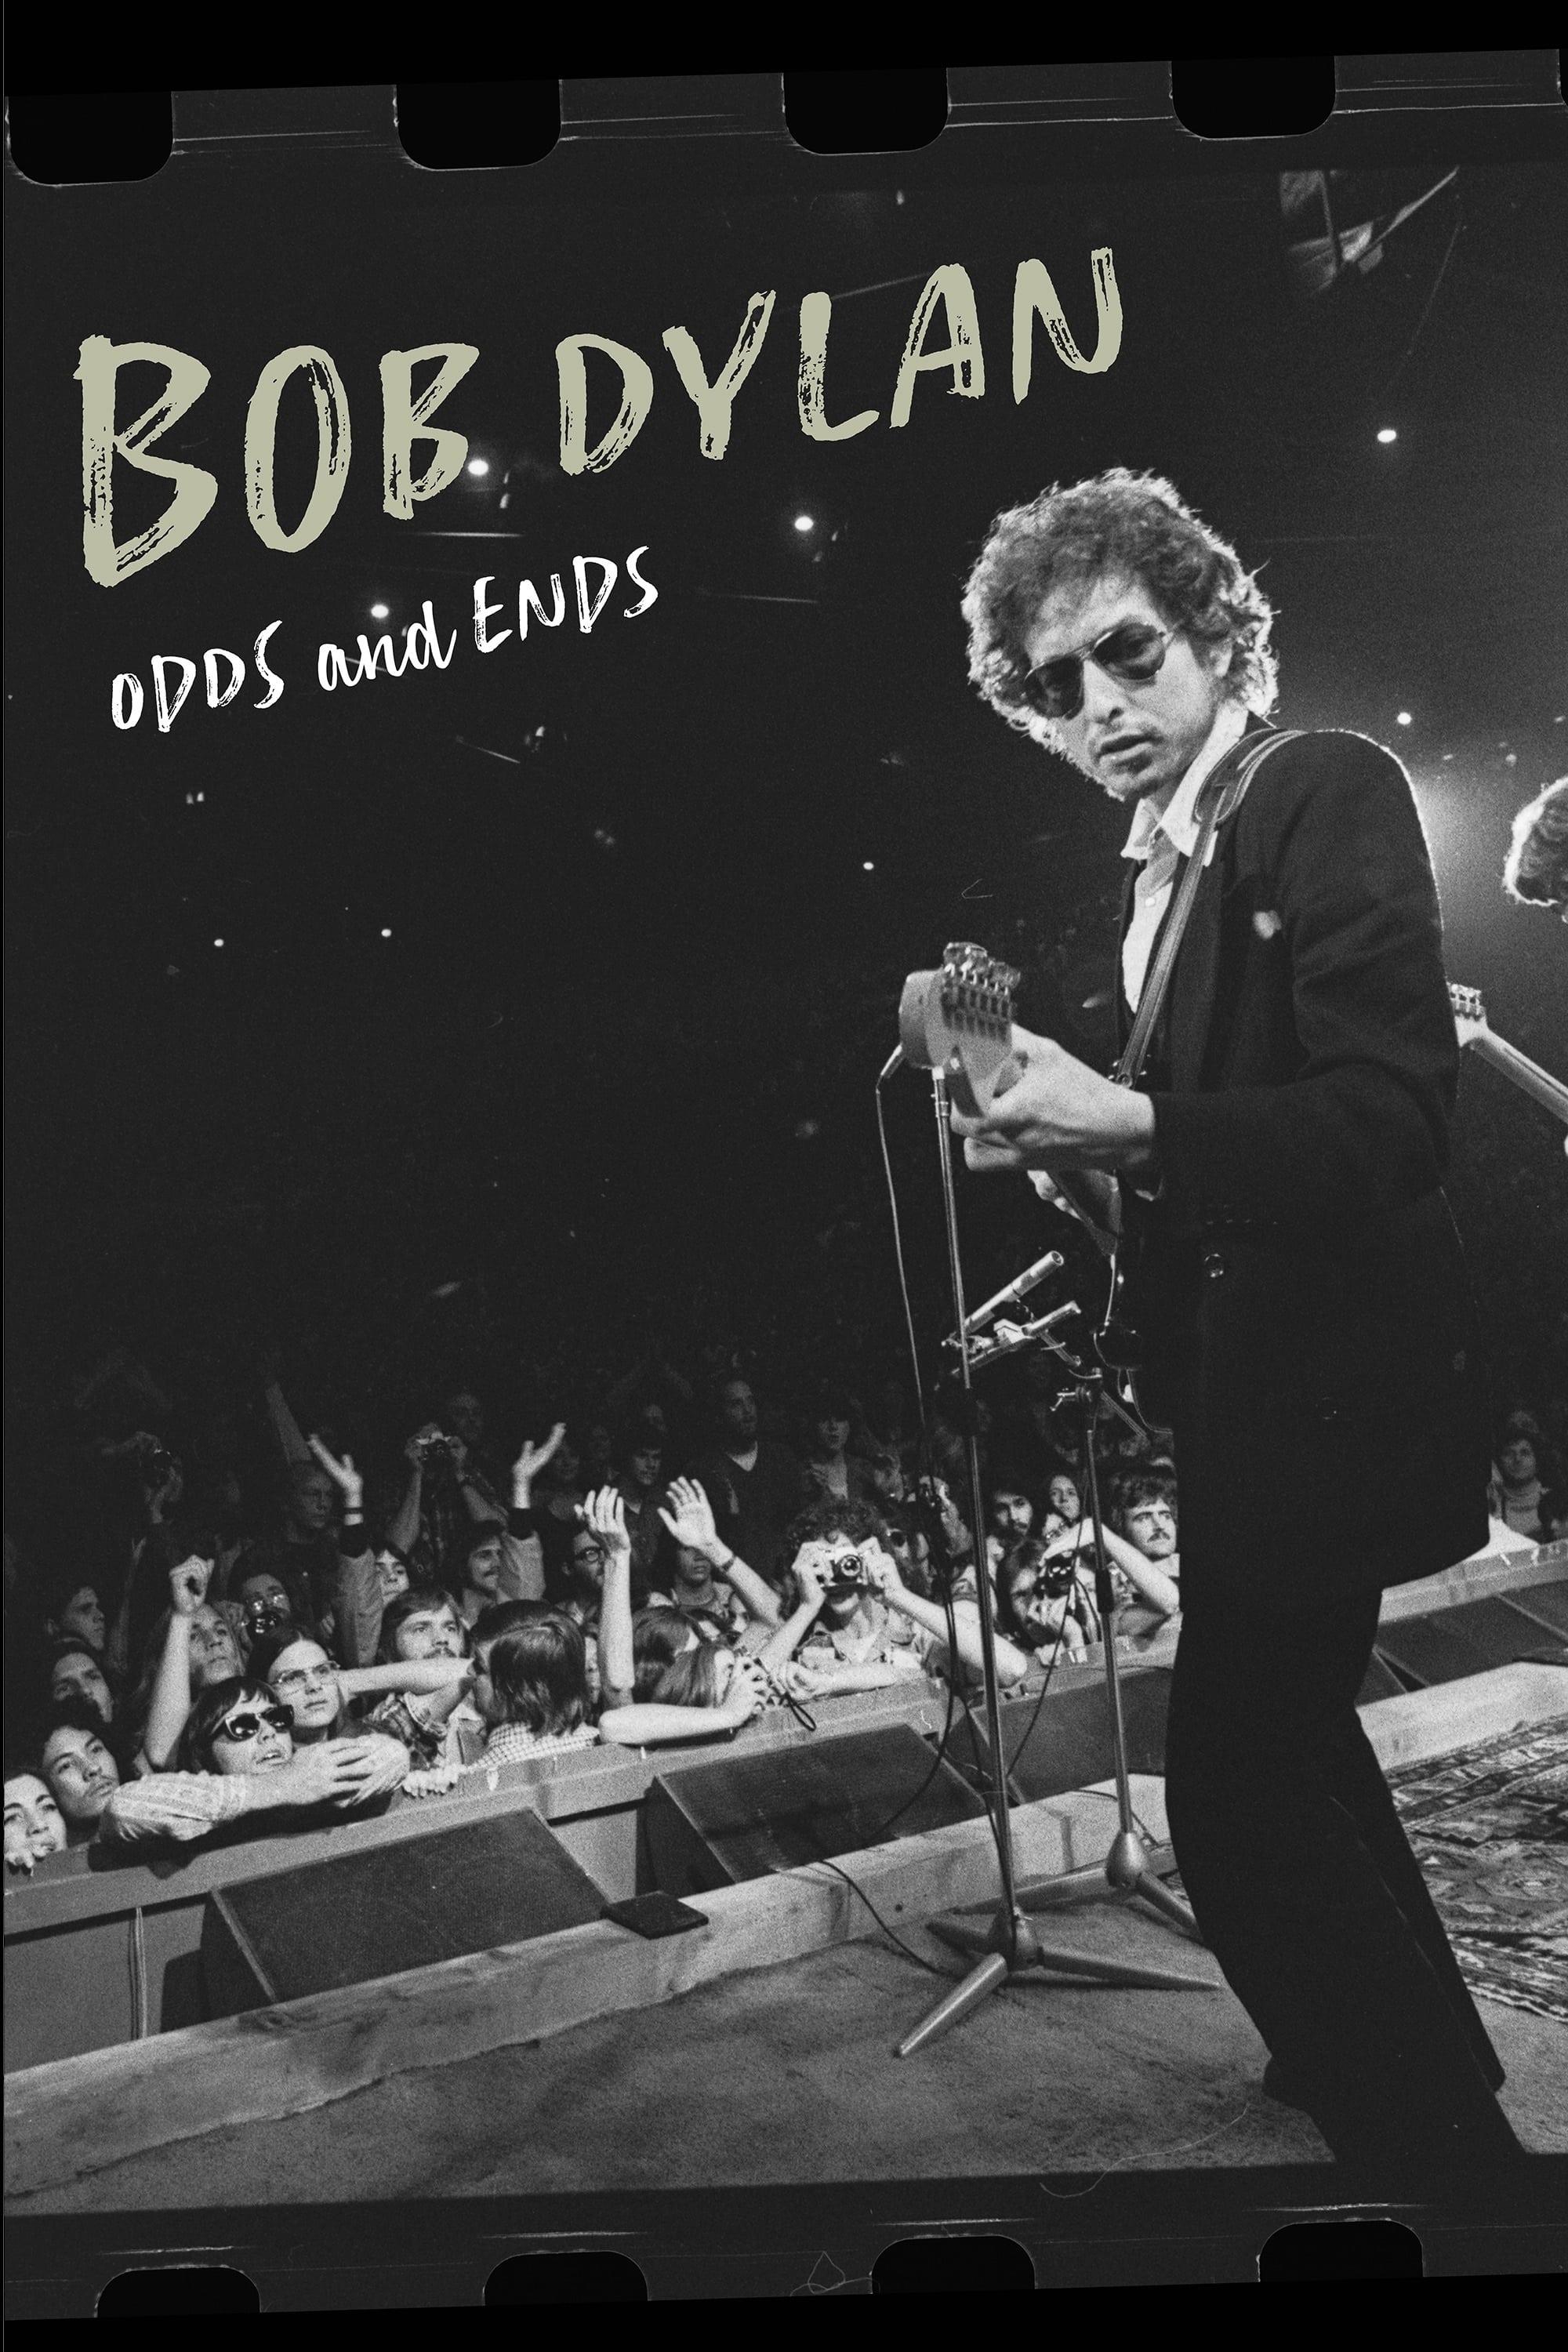 Bob Dylan: Odds and Ends poster